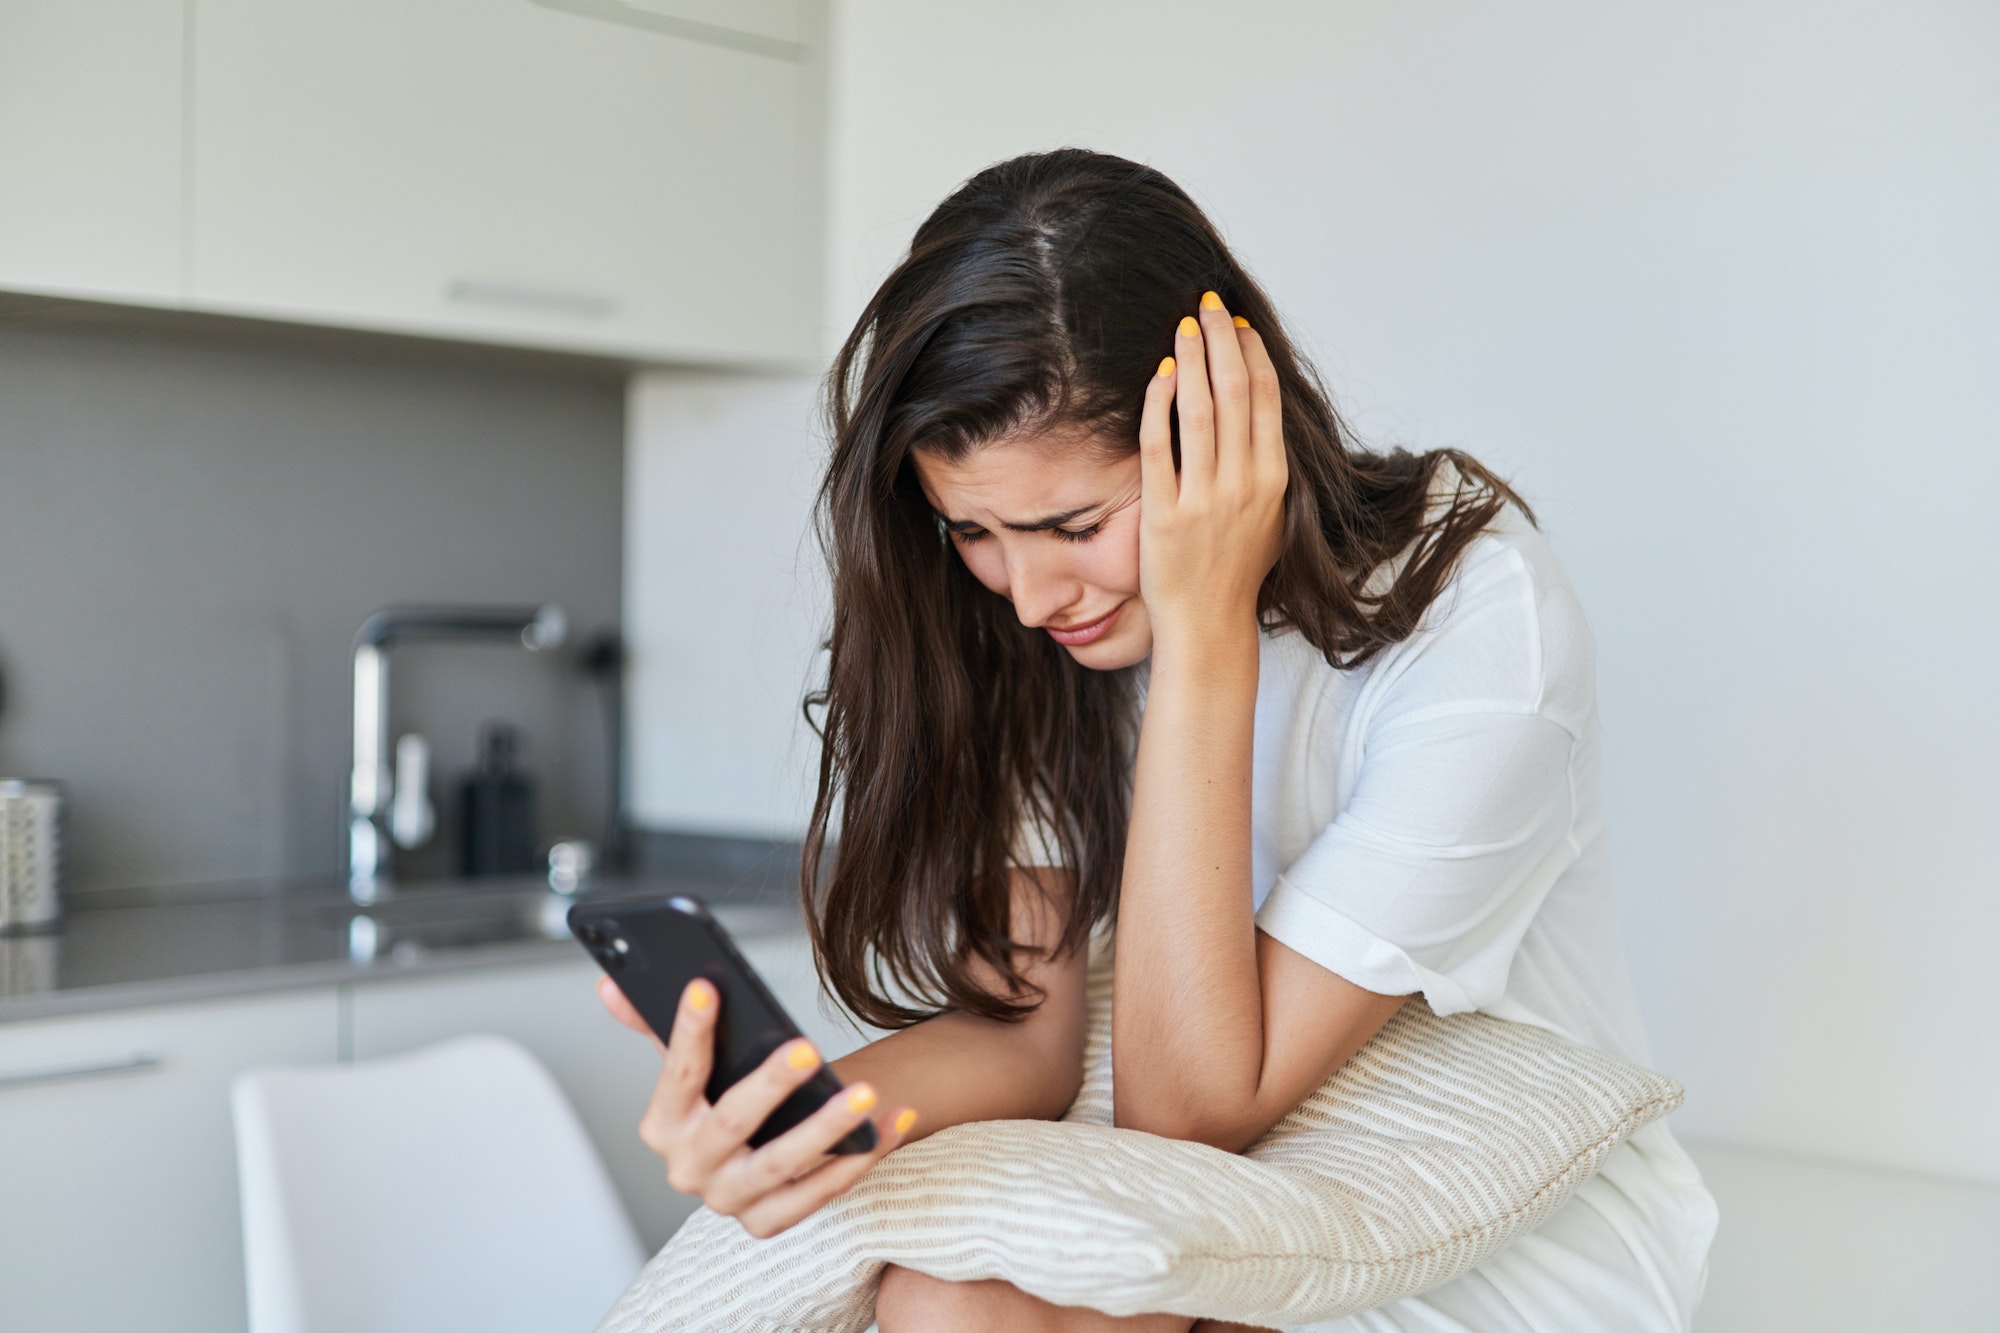 Sad young woman with depression using her mobile phone at home